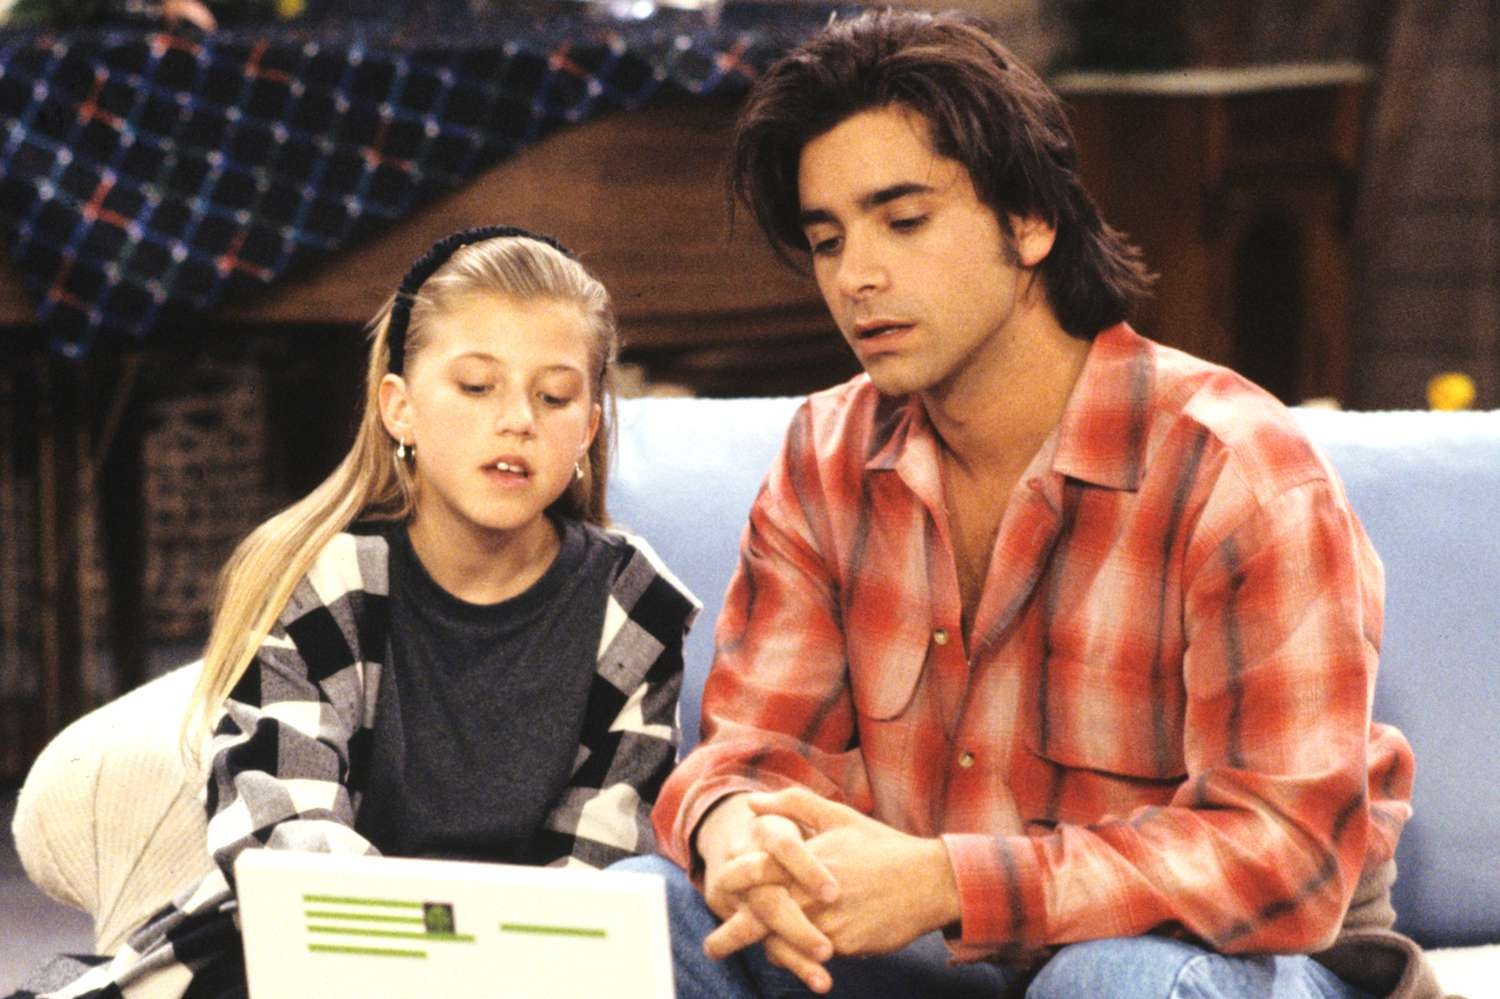 John Stamos and Jodie Sweetin in Full House